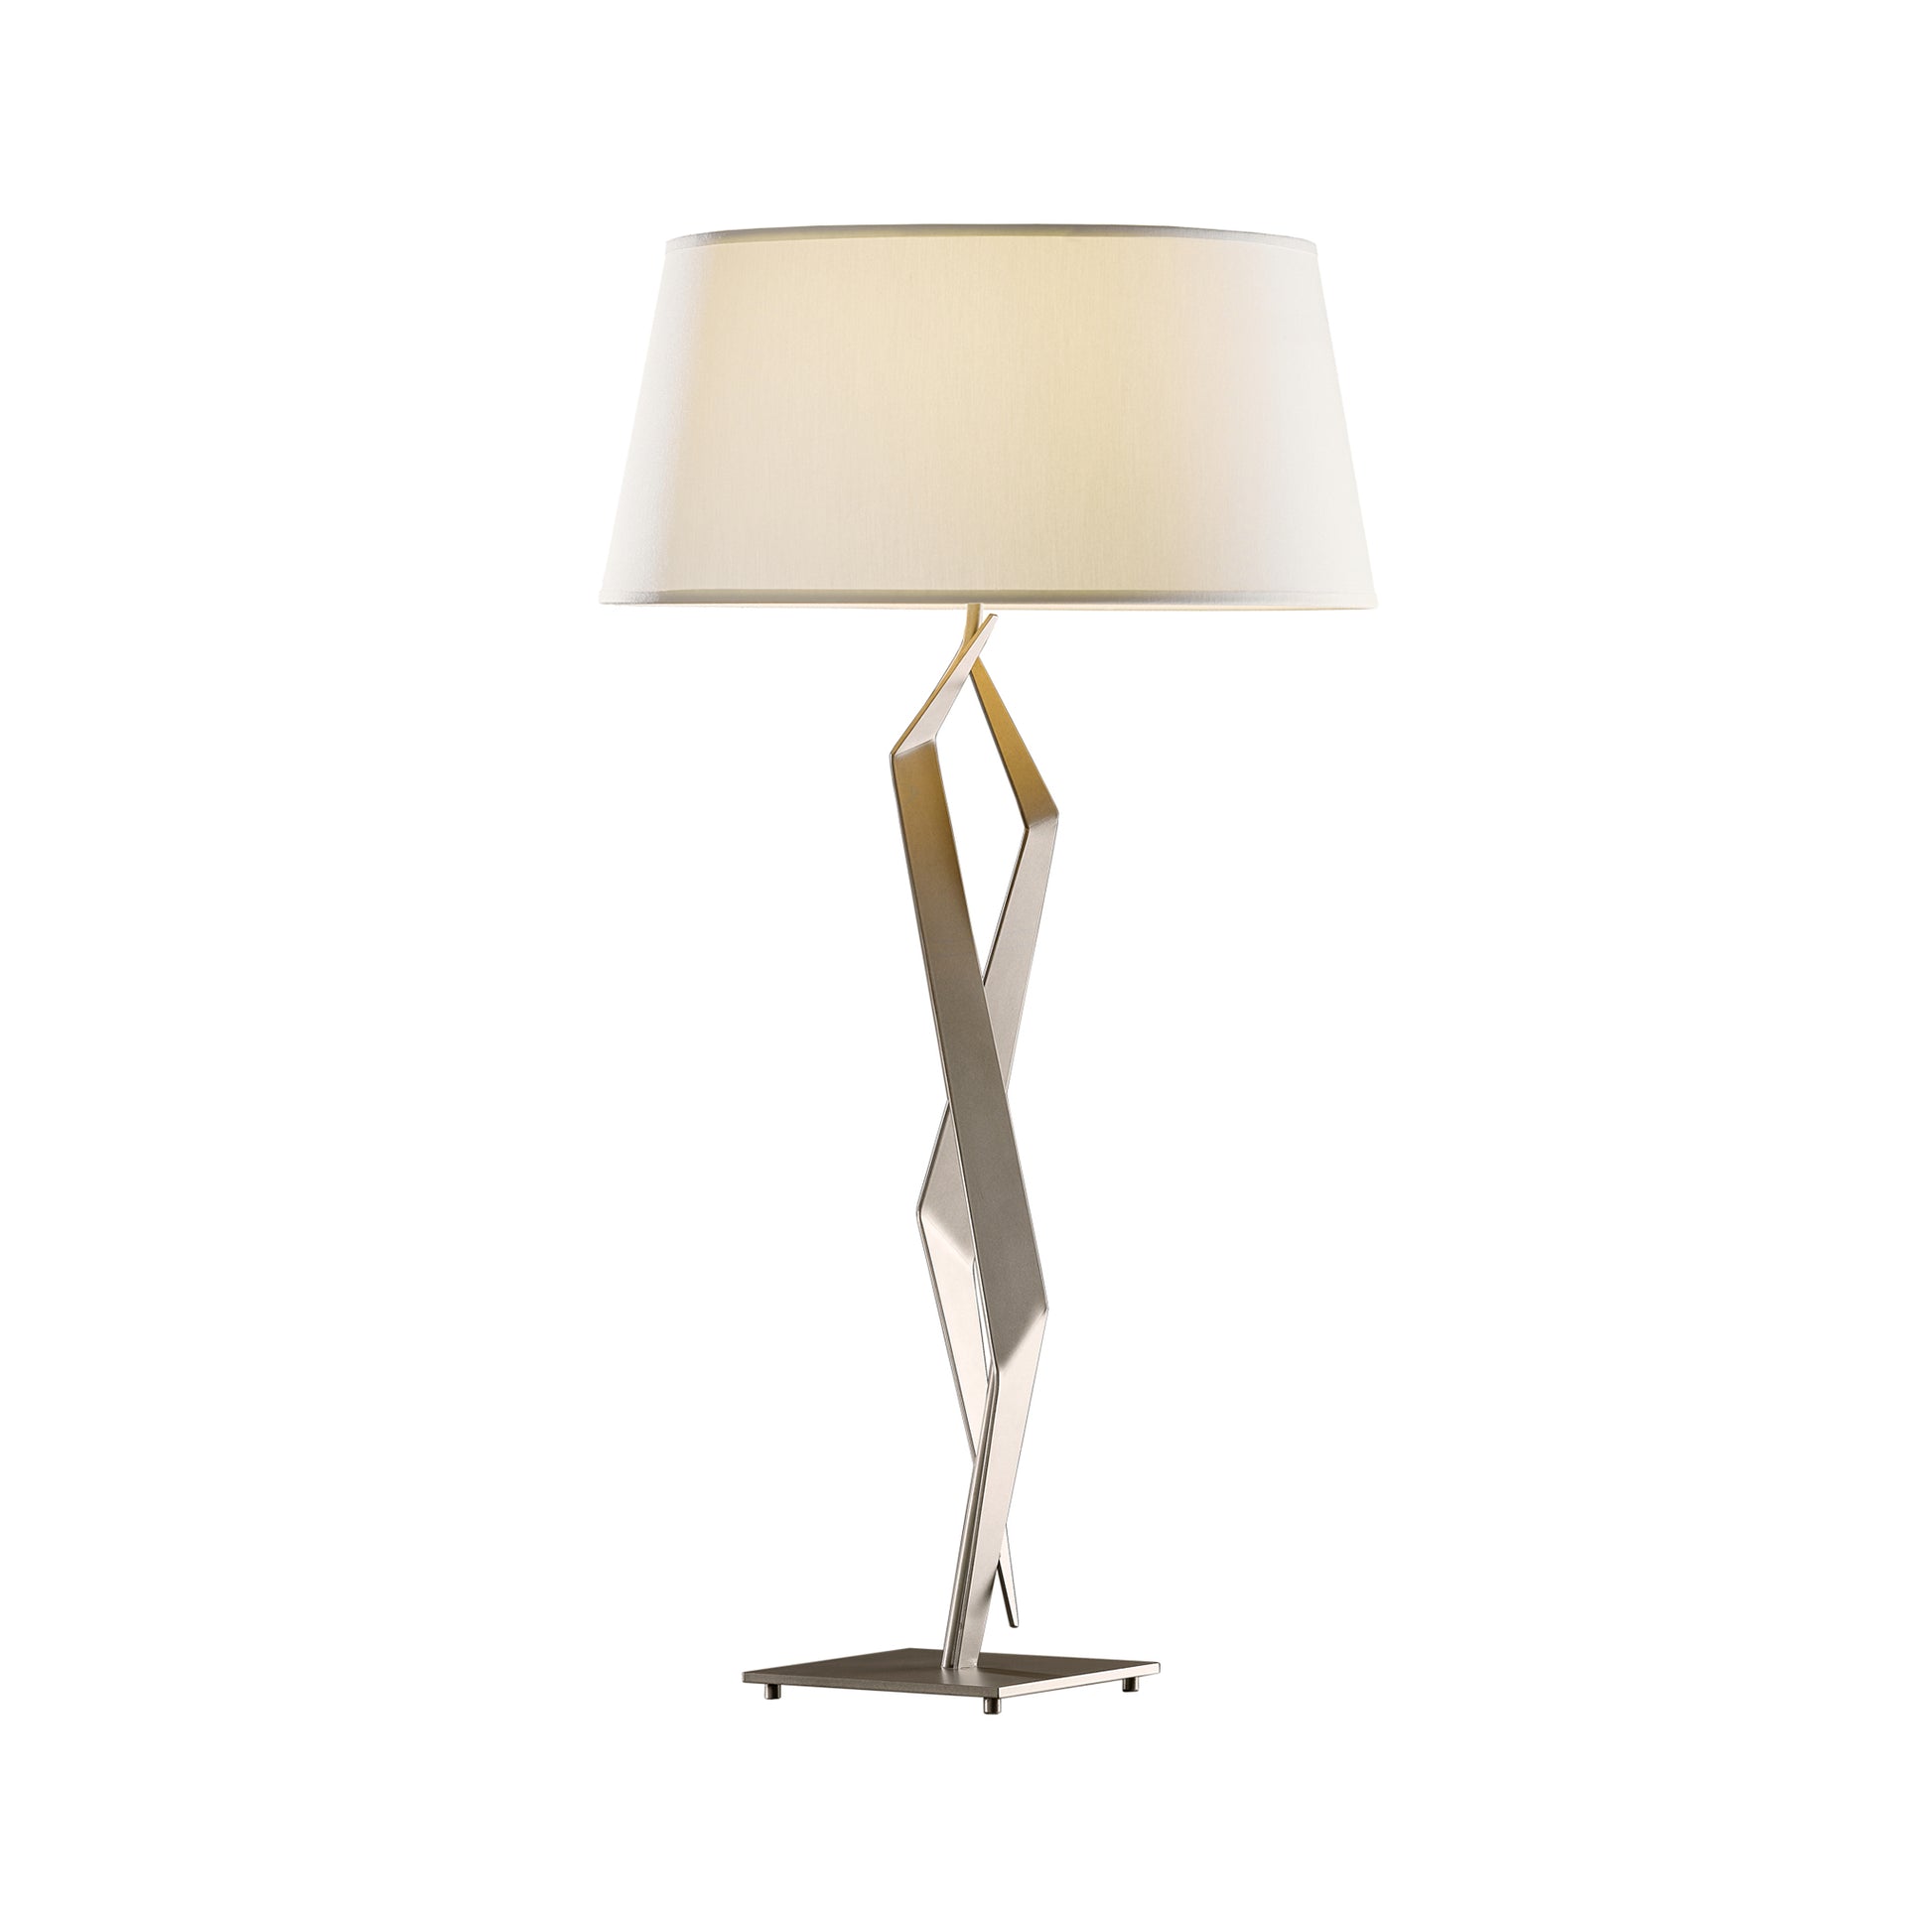 A modern Facet Table Lamp with a zigzag metallic base and a large, round, white lampshade, handcrafted by Hubbardton Forge, isolated on a white background.